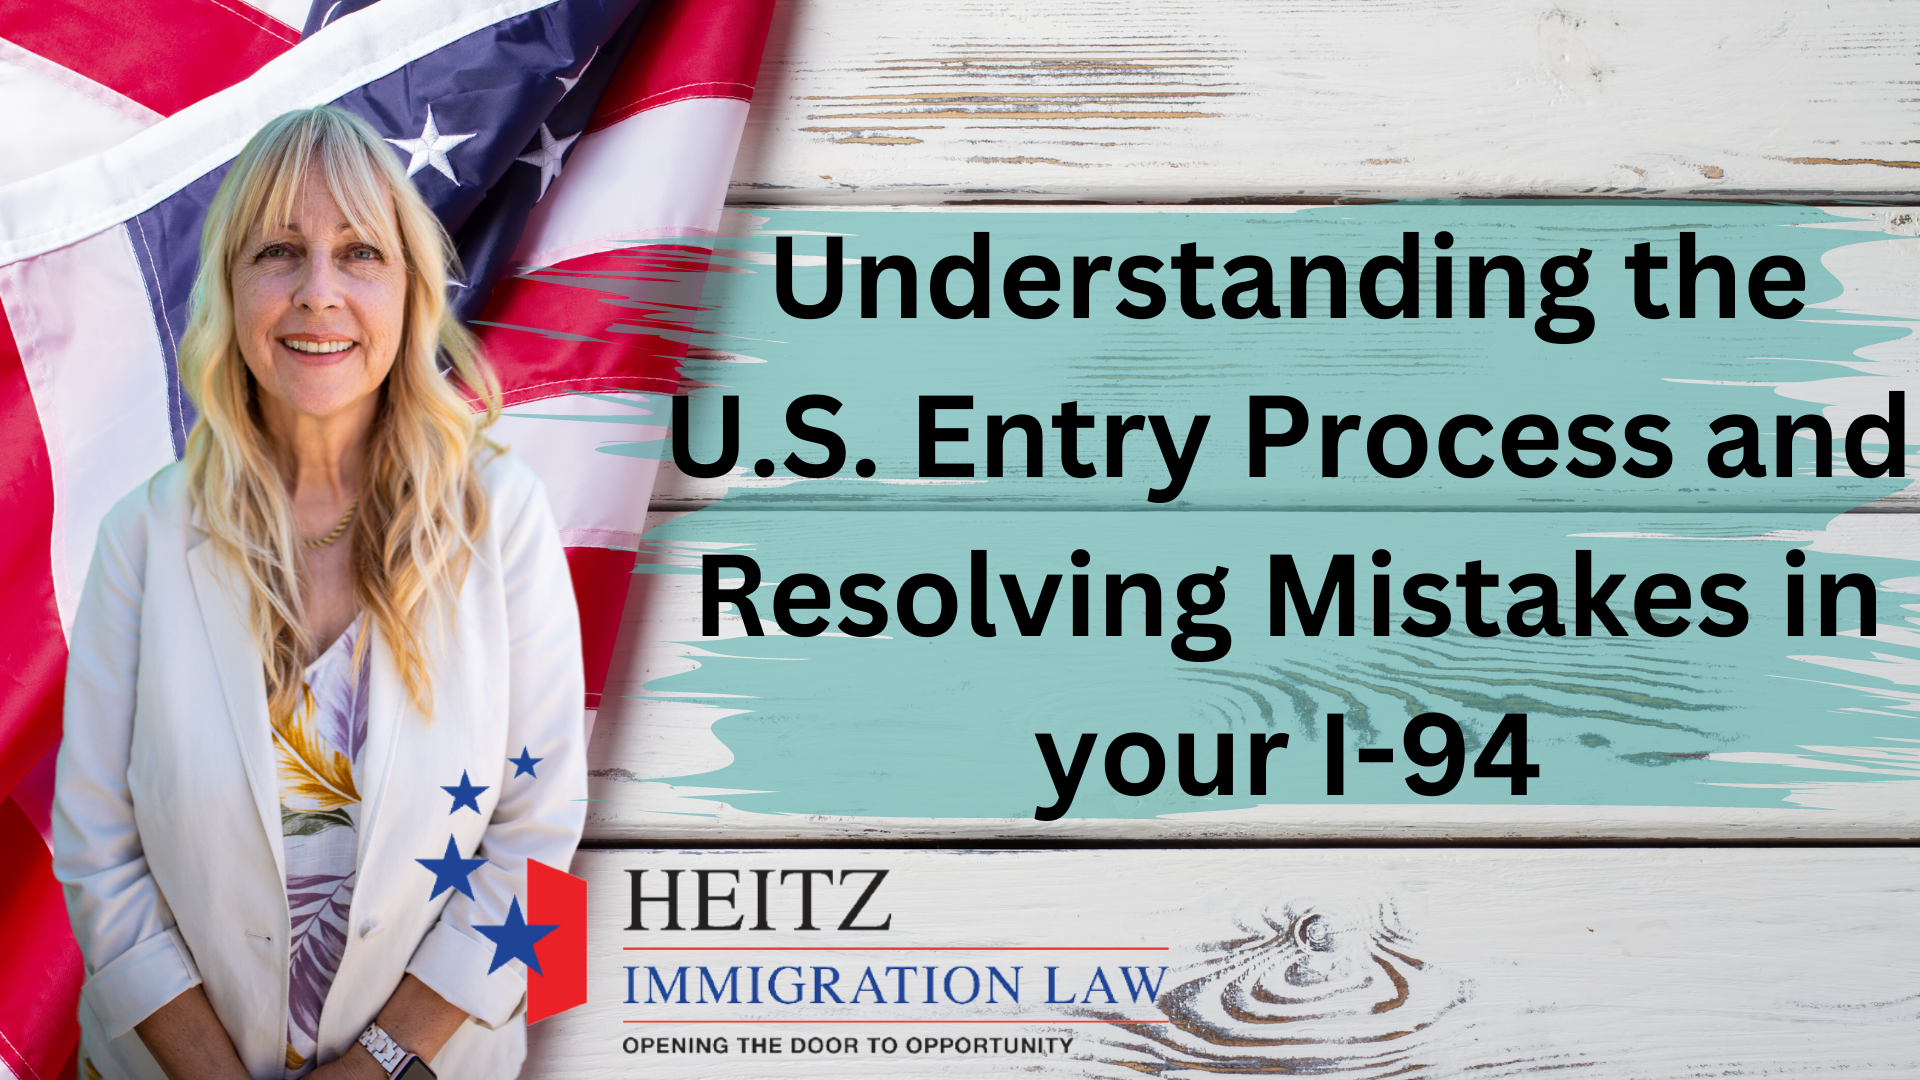 Understanding the U.S. Entry Process and Resolving Mistakes in your I-94